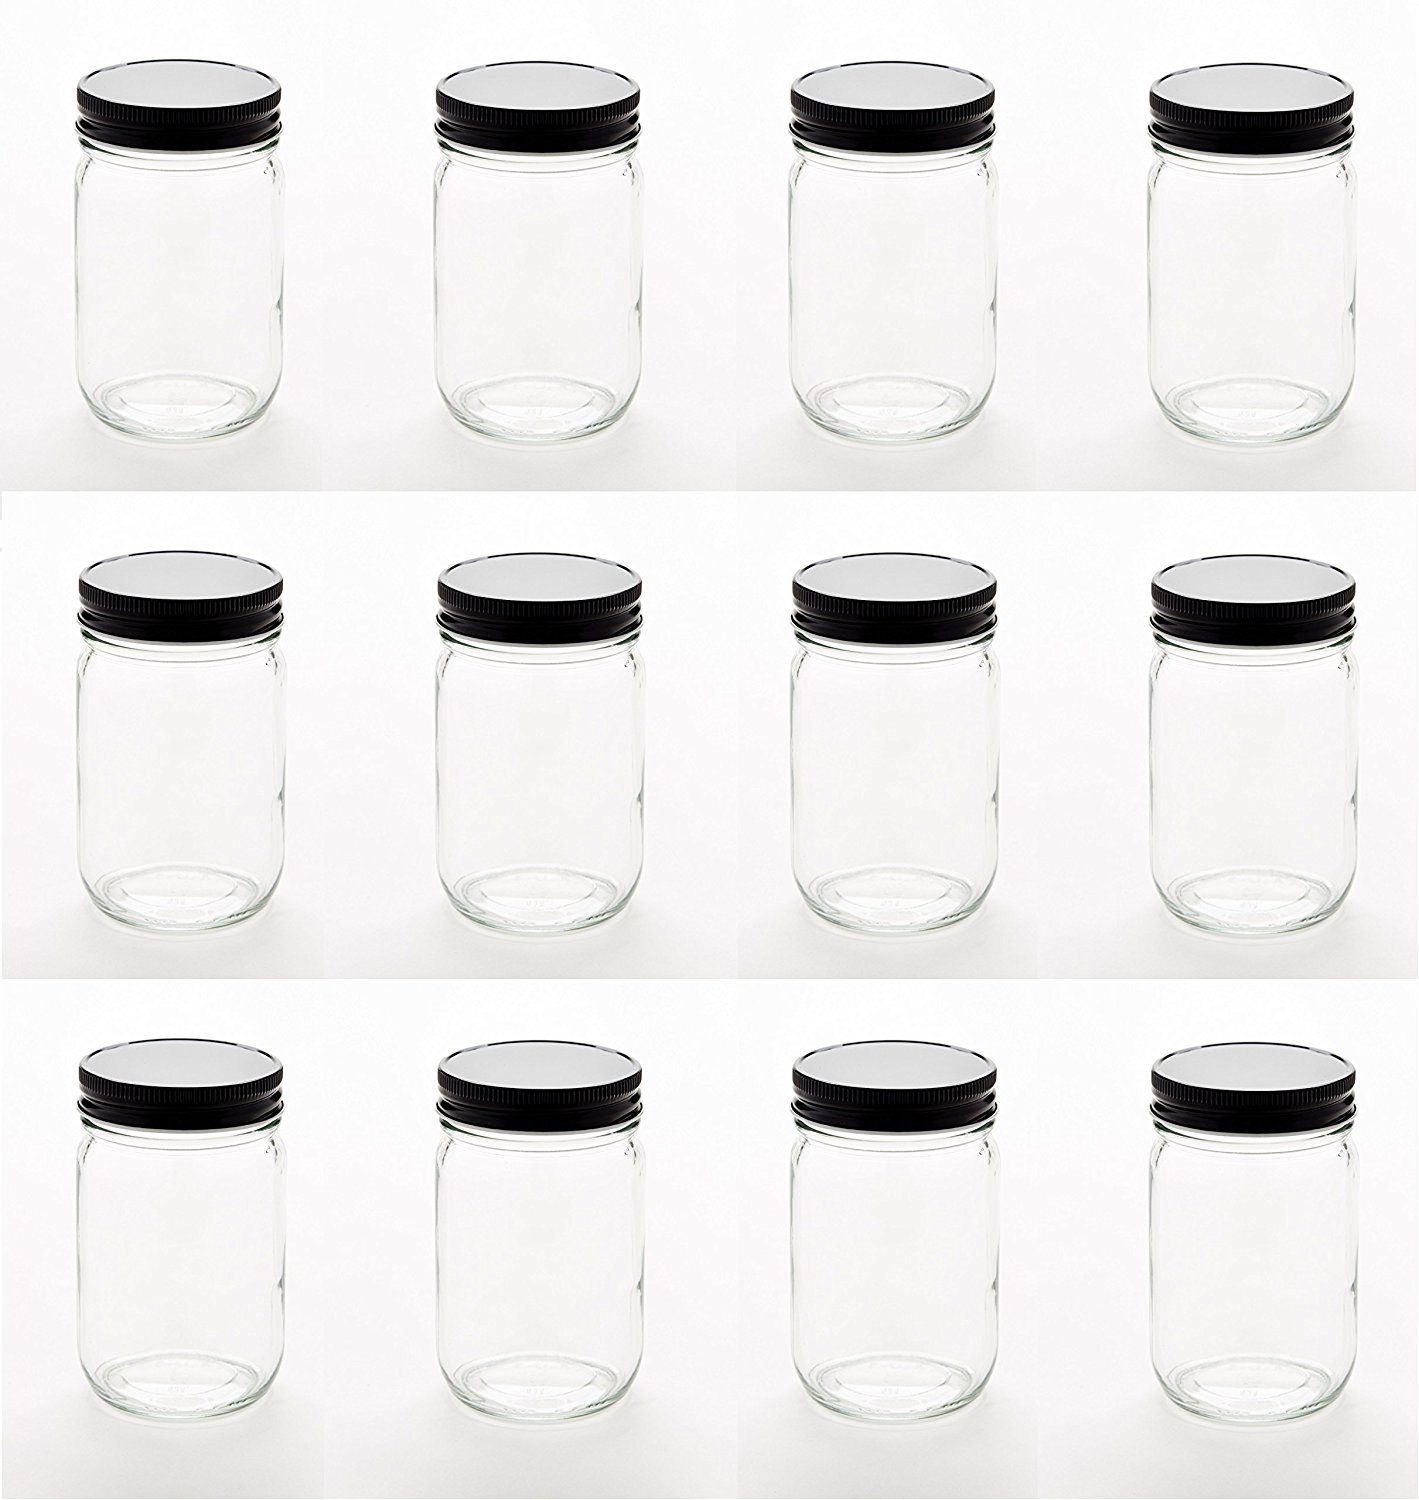 North Mountain Supply - SS-9OZ-BK 9 Ounce Glass Straight Sided Mason Canning Jars - with 70mm Black Metal Lids - Case of 12 Black Lids